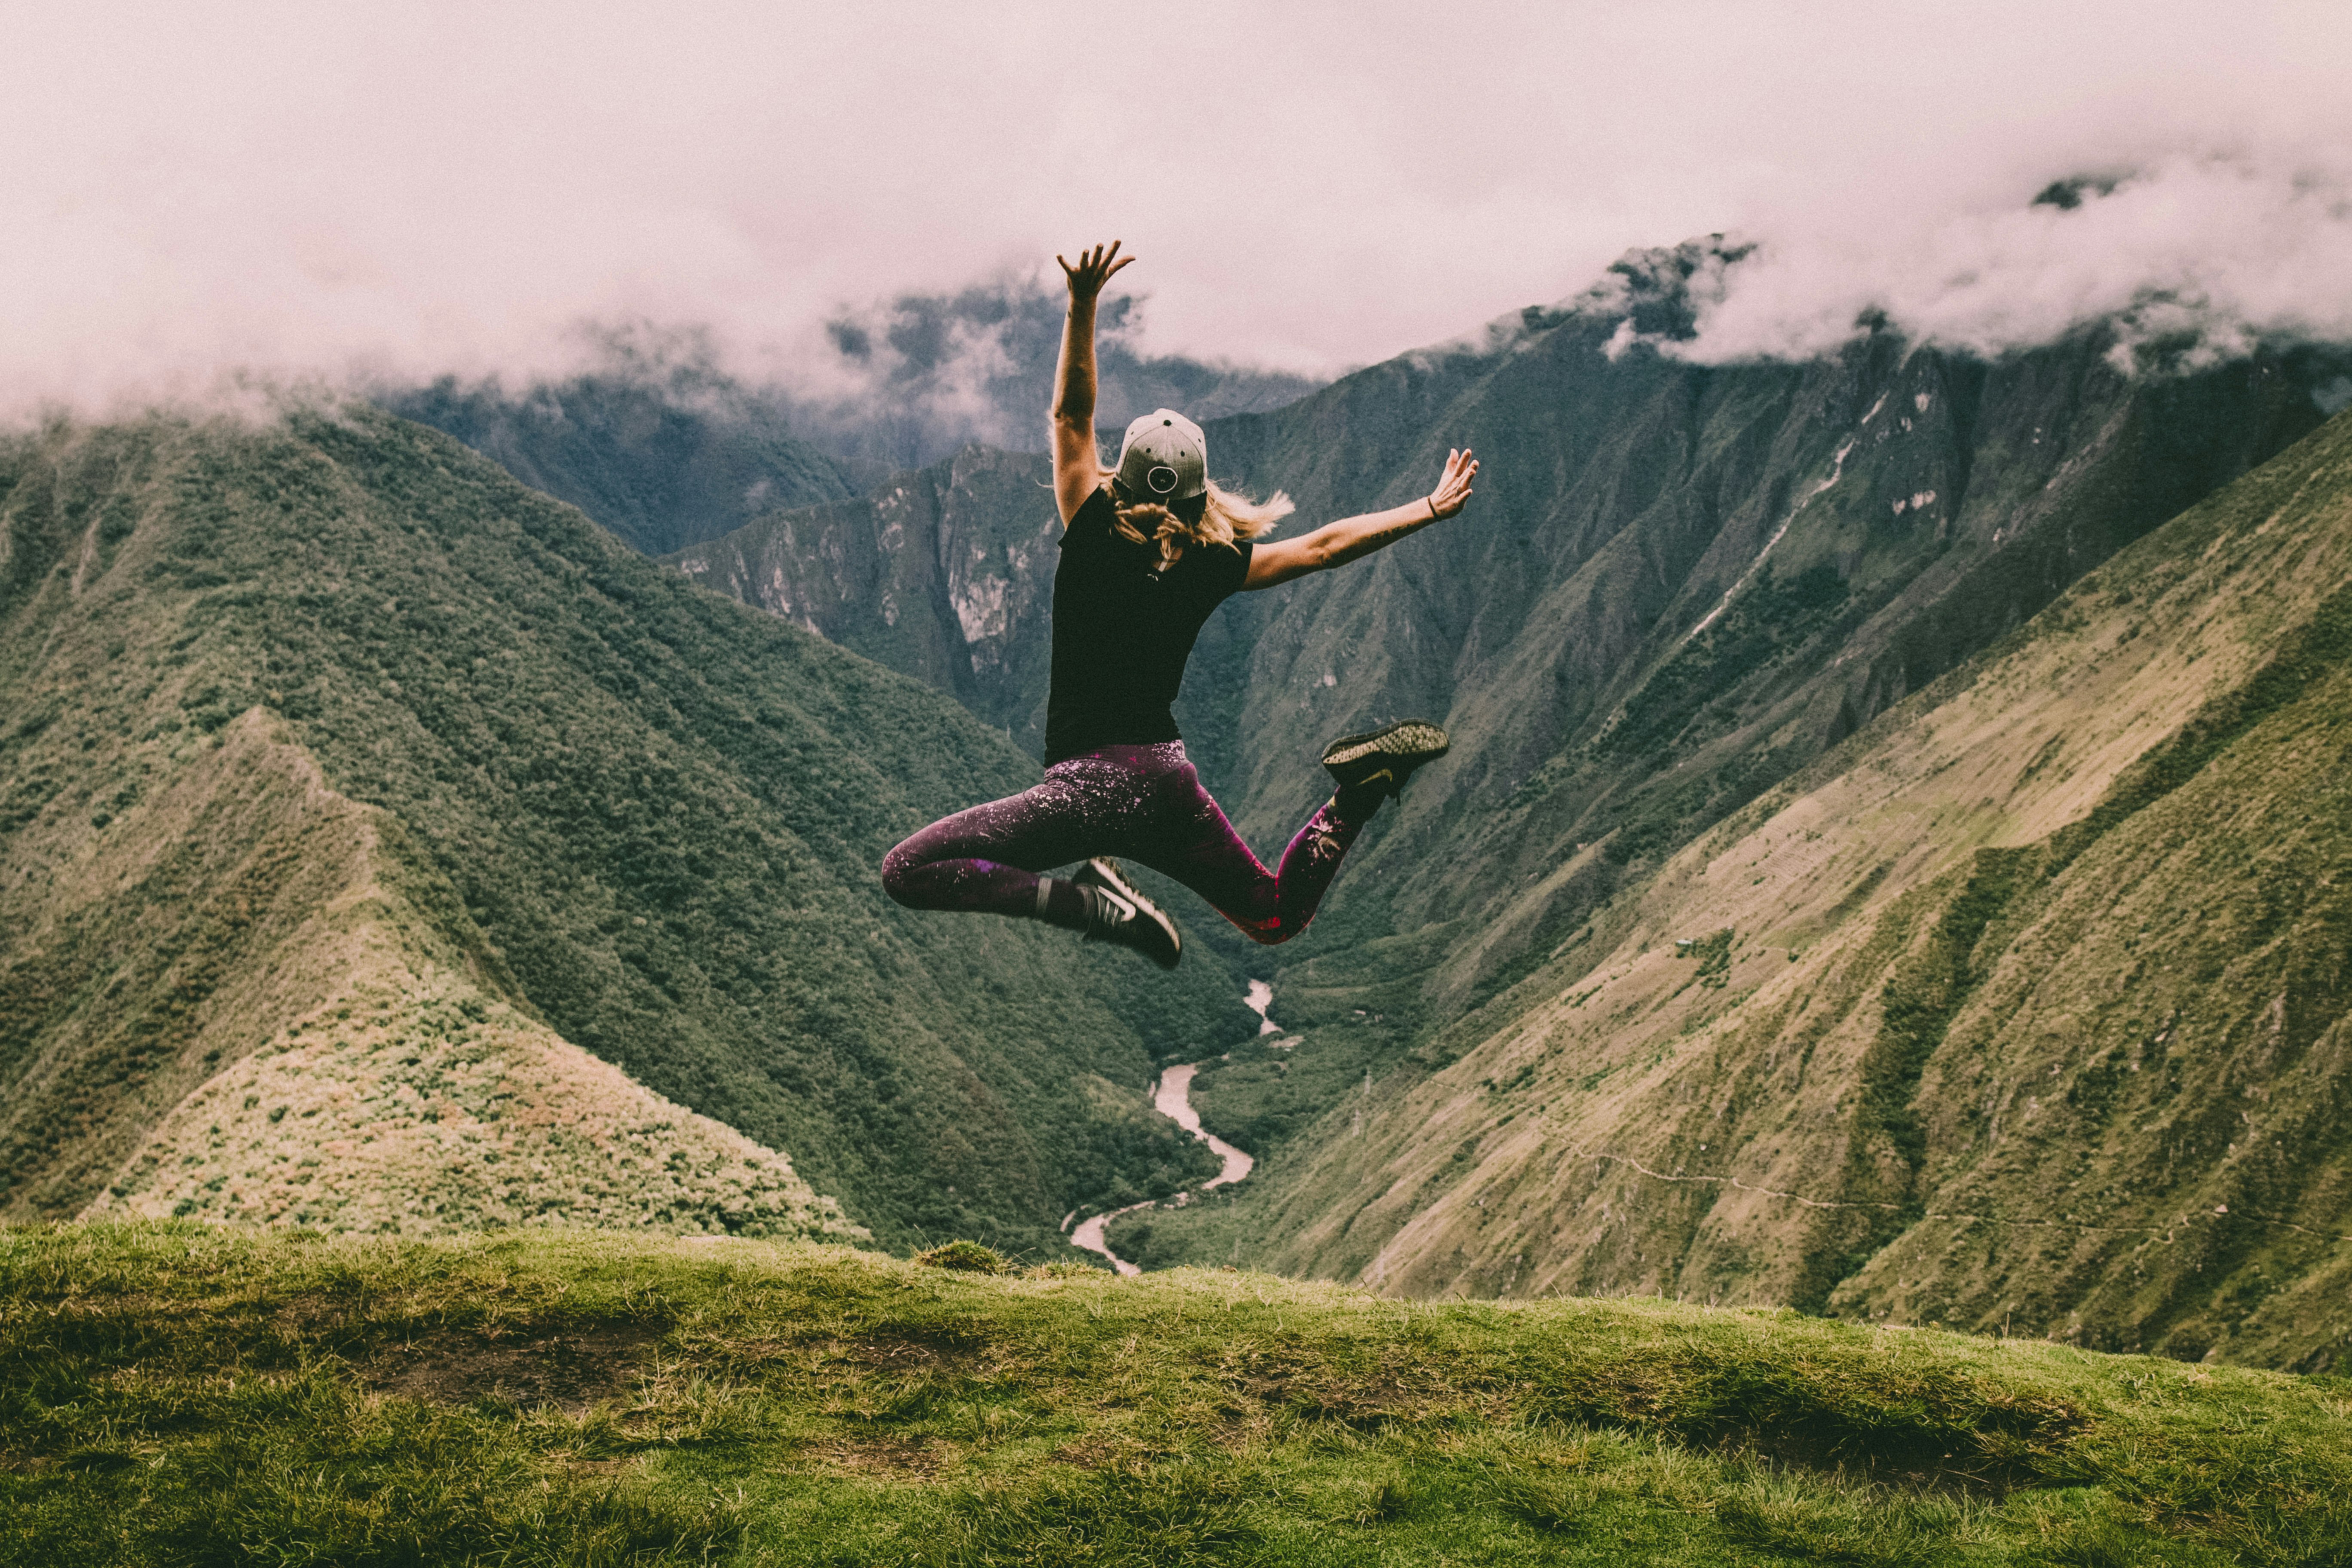 A fellow traveller had to have that classic jumping photo in this amazing place in the middle of the Andes.